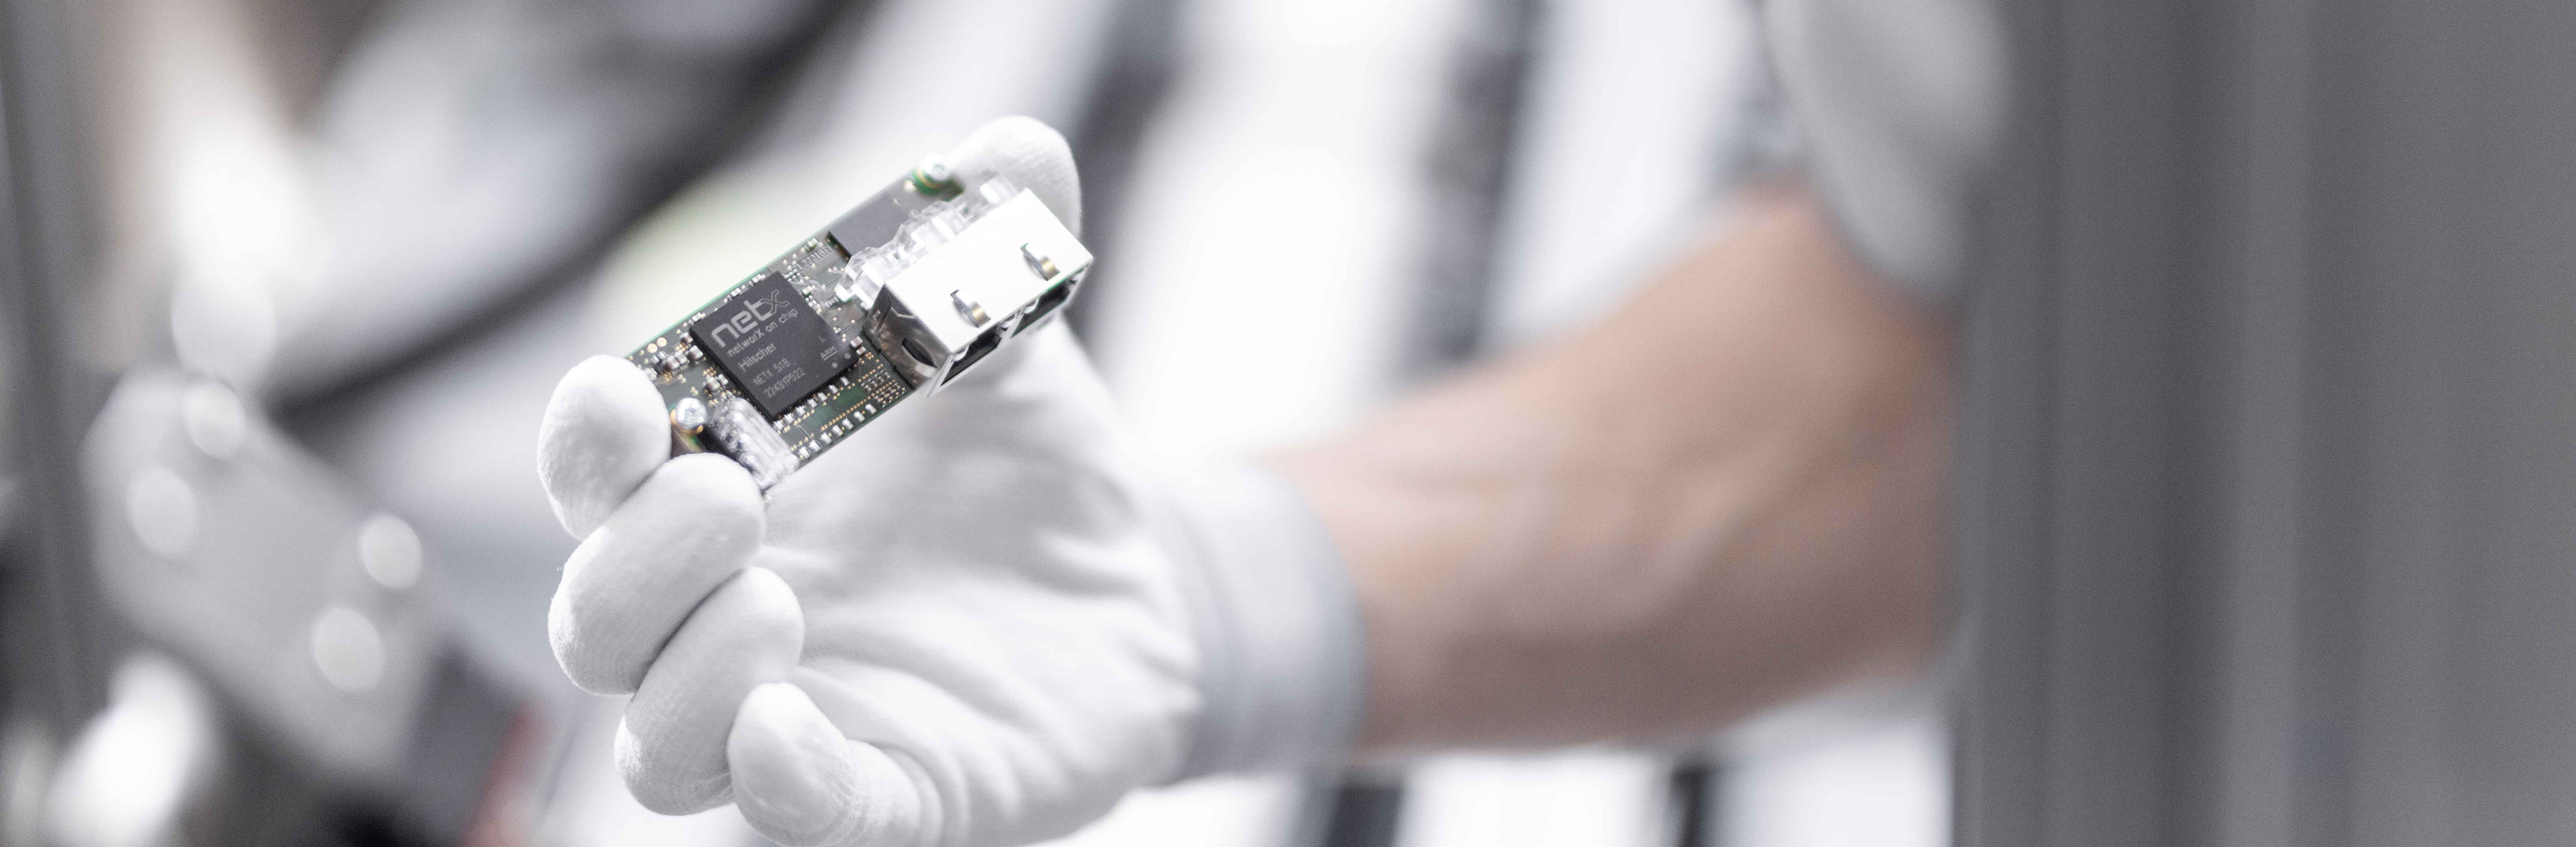 A comX module is being held by a hand in white gloves. There are two Ethernet sockets mounted on the module as well as a black netX chip. The surroundings show a semiconductor production machine and are bright and blurry.